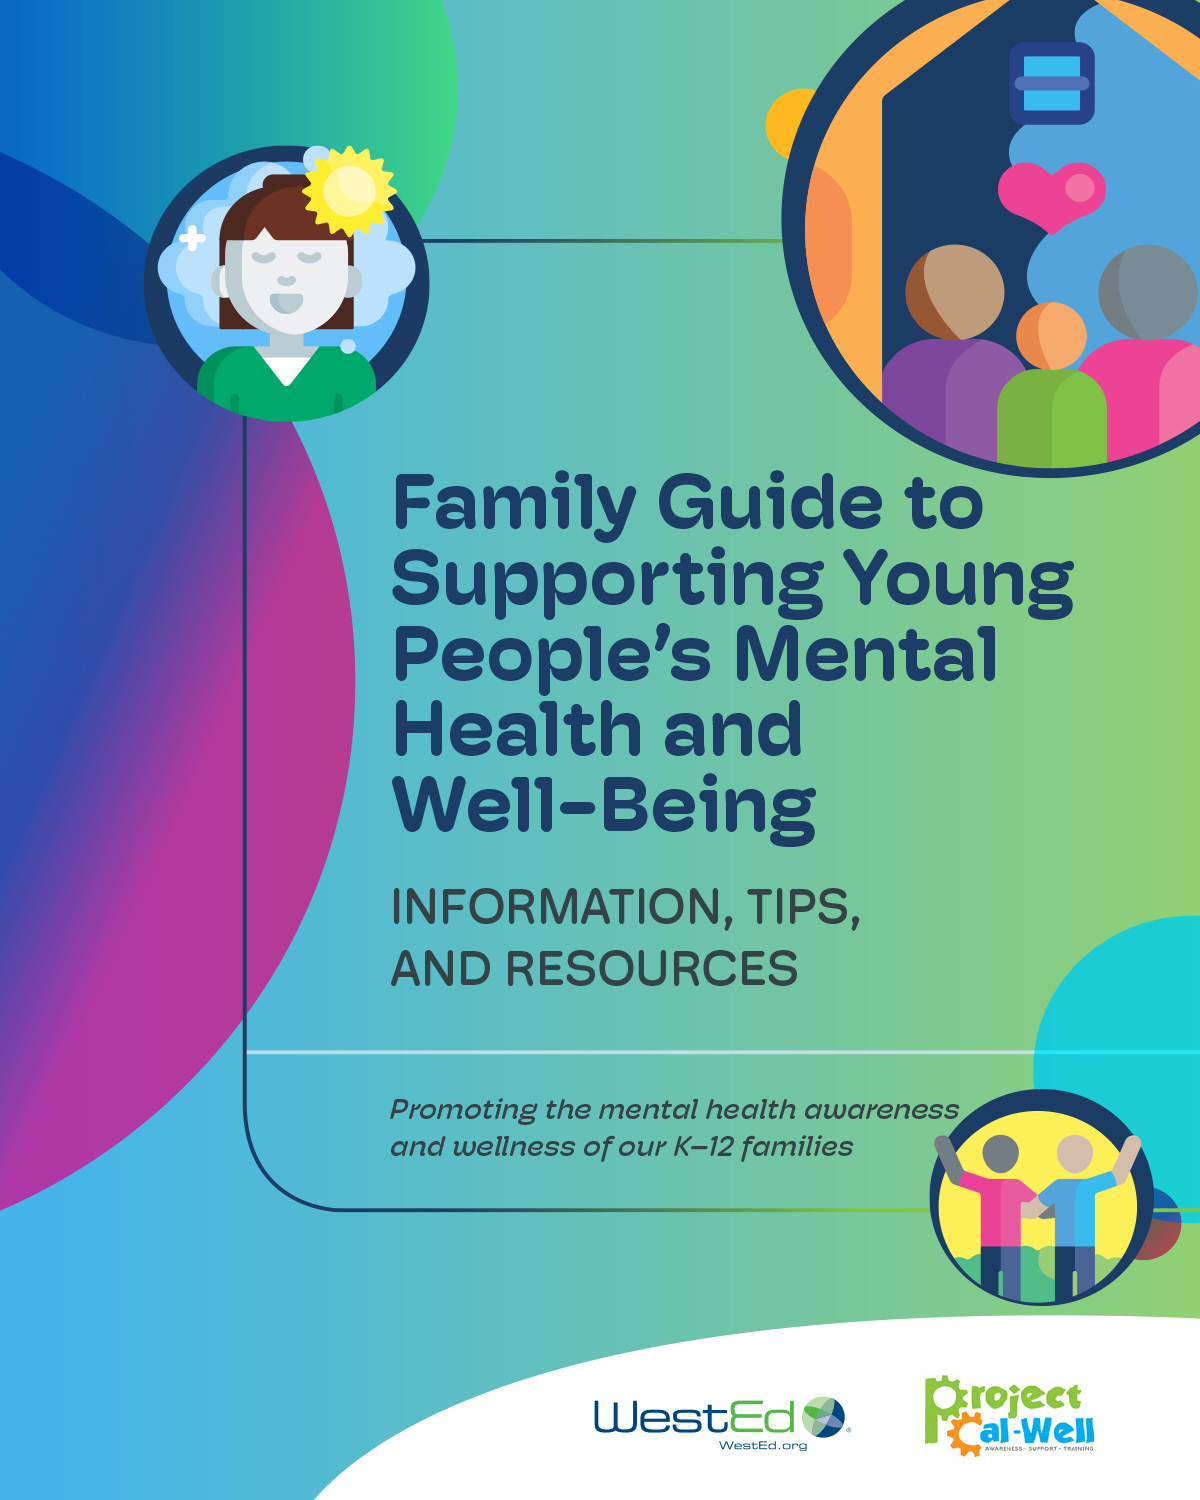 Family Guide to Supporting Mental Health and Well-Being. Information, Tips, and Resources